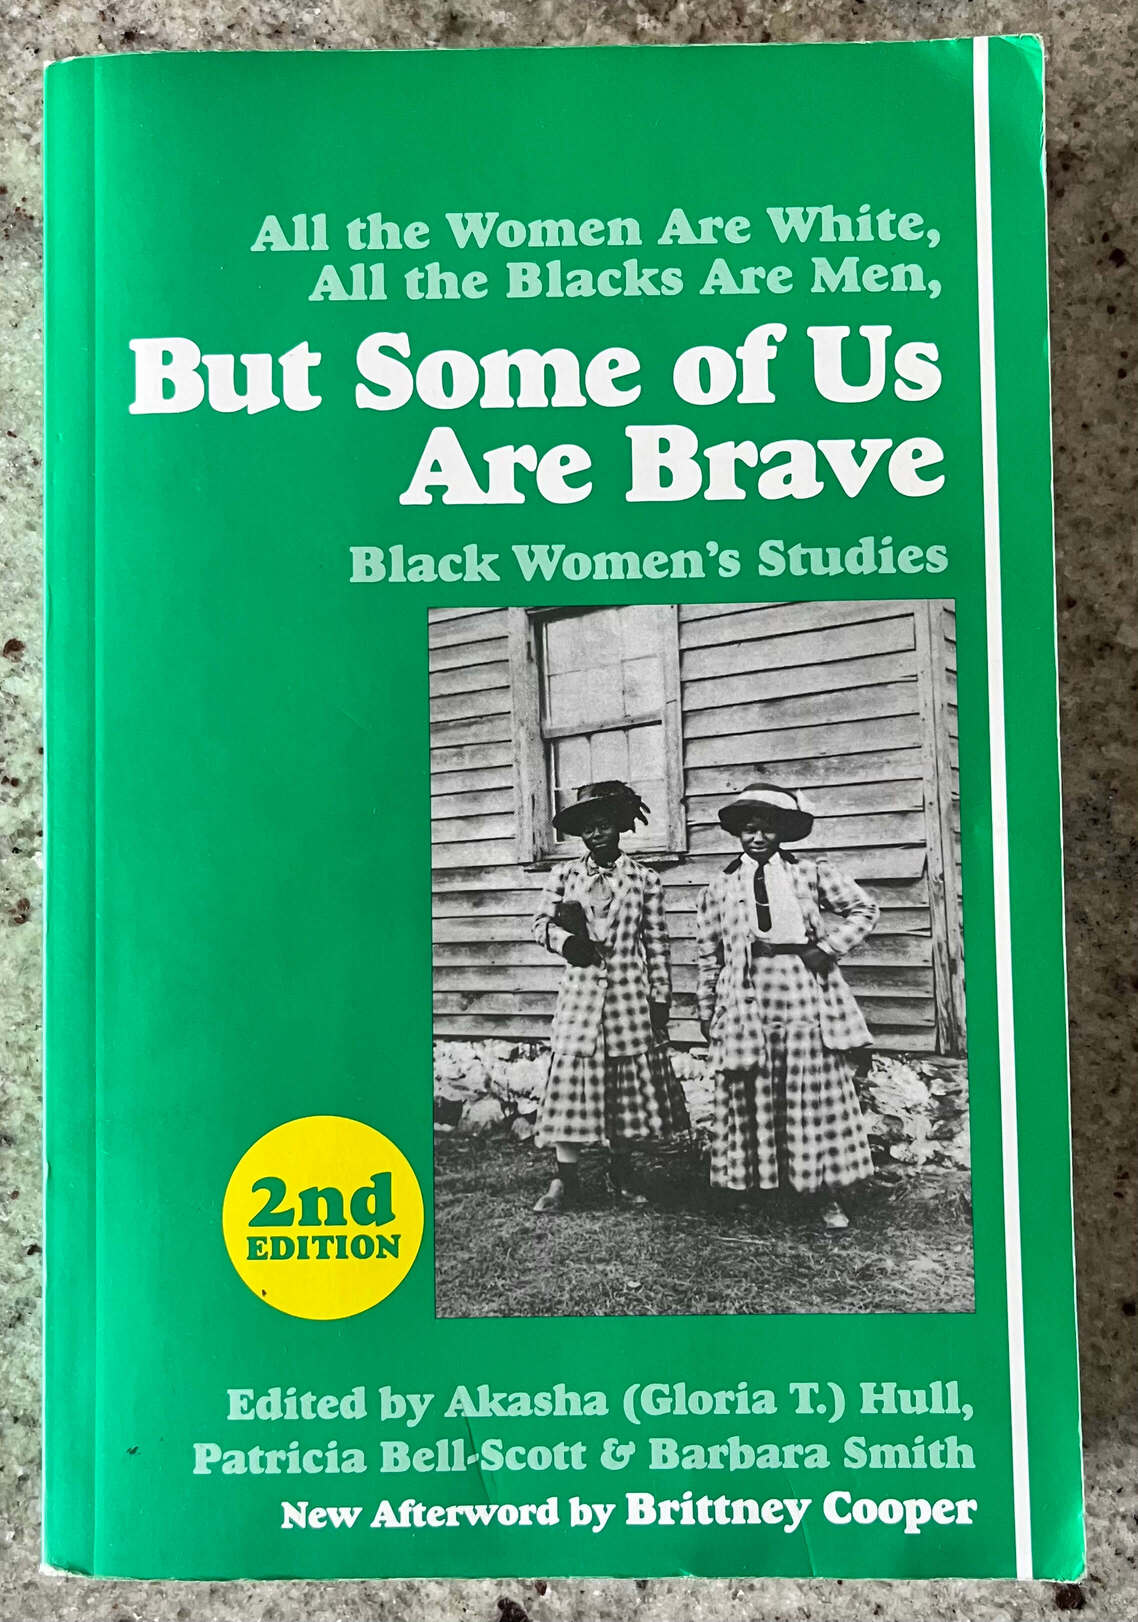 “All the Women Are White, All the Blacks Are Men, But Some of Us Are Brave: Black Women’s Studies” Edited by Akasha (Gloria T.) Hull, Patricia Bell-Scott & Barbara Smith New Afterword by Brittney Cooper.